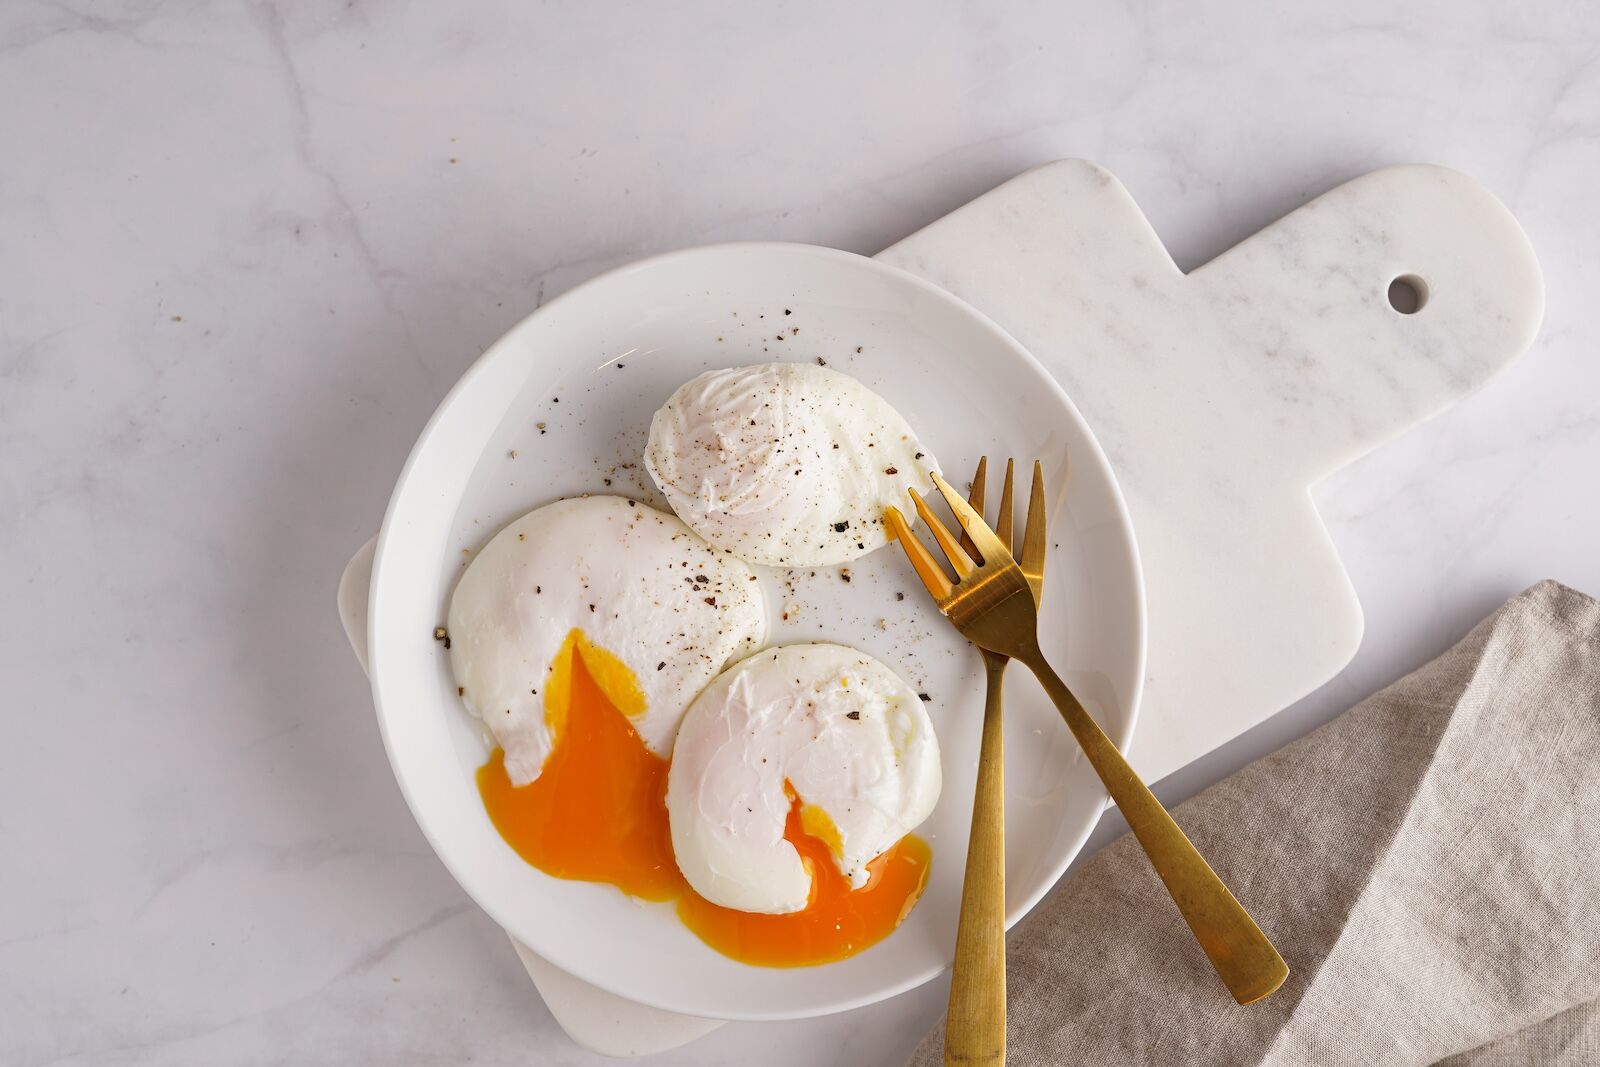 How to Make Perfect Poached Eggs Every Time